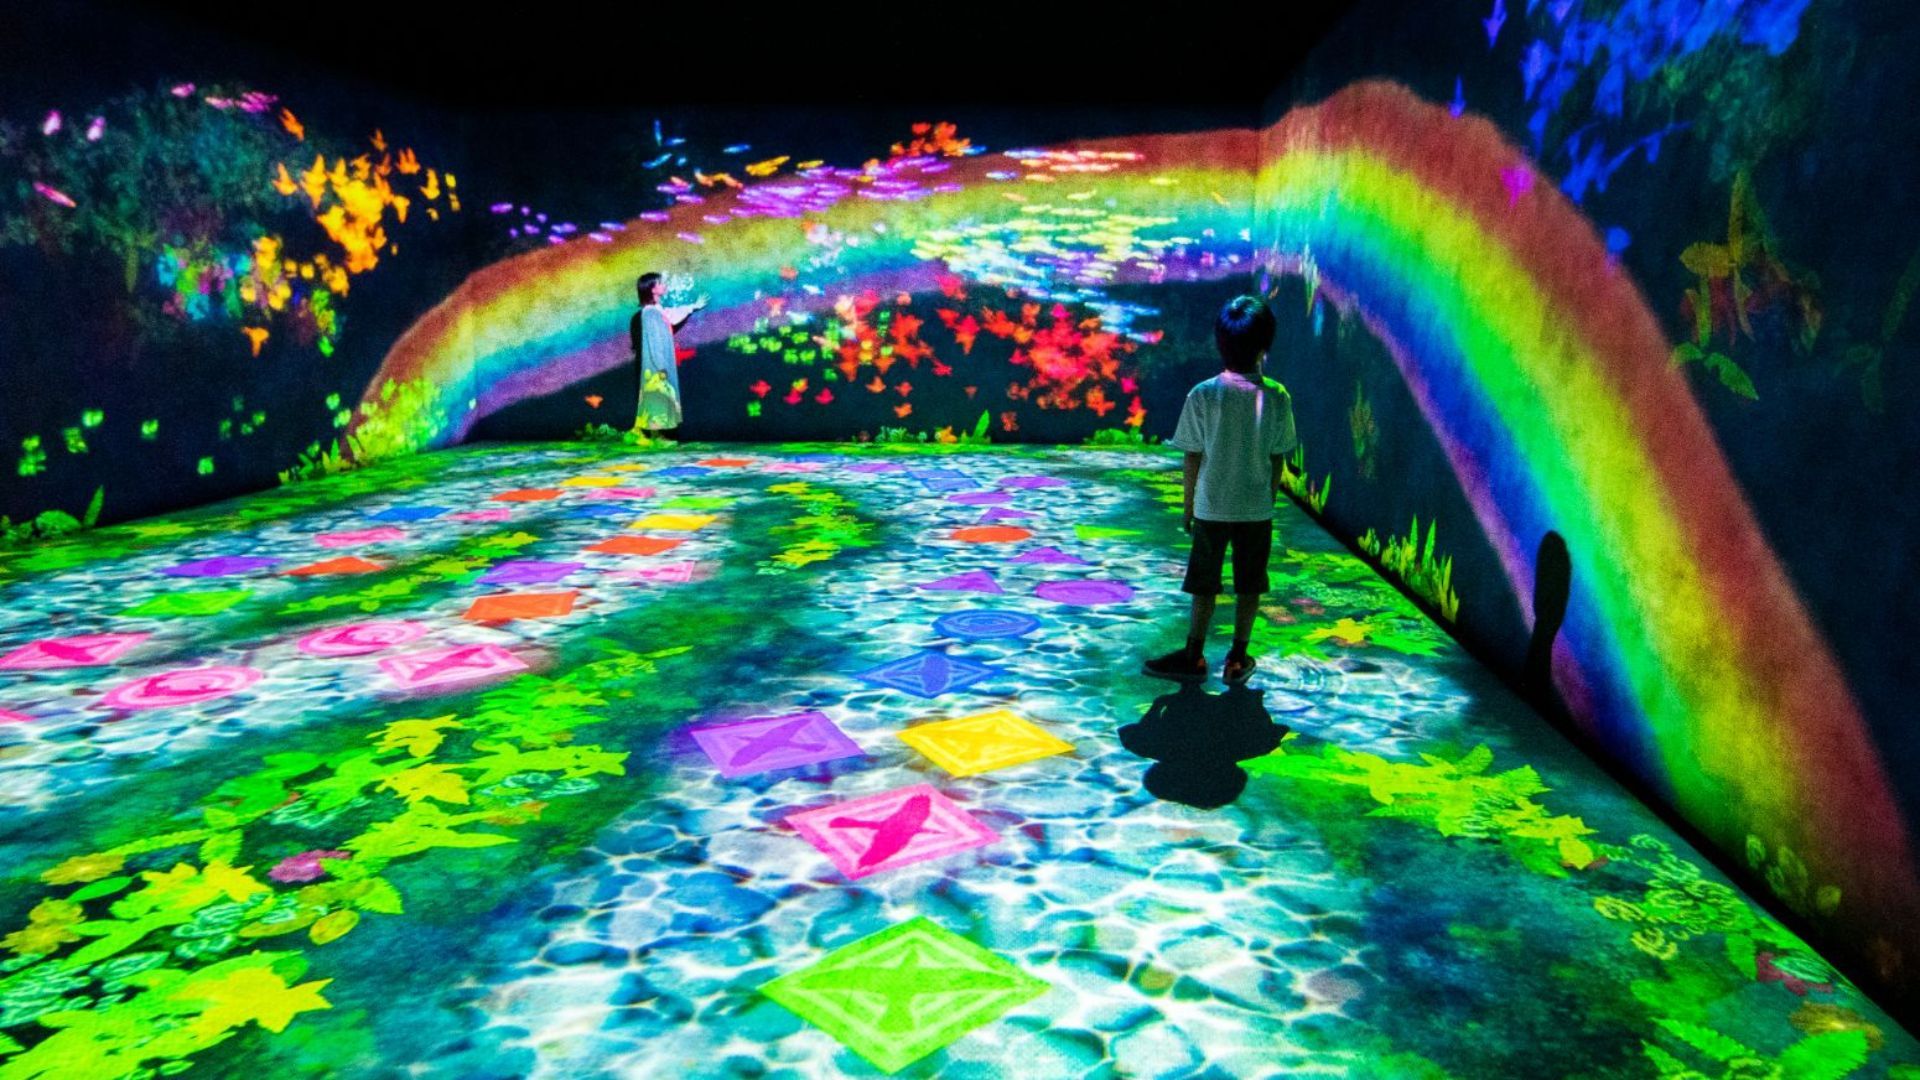 Japan’s famous teamLab attraction is coming to Hong Kong this July